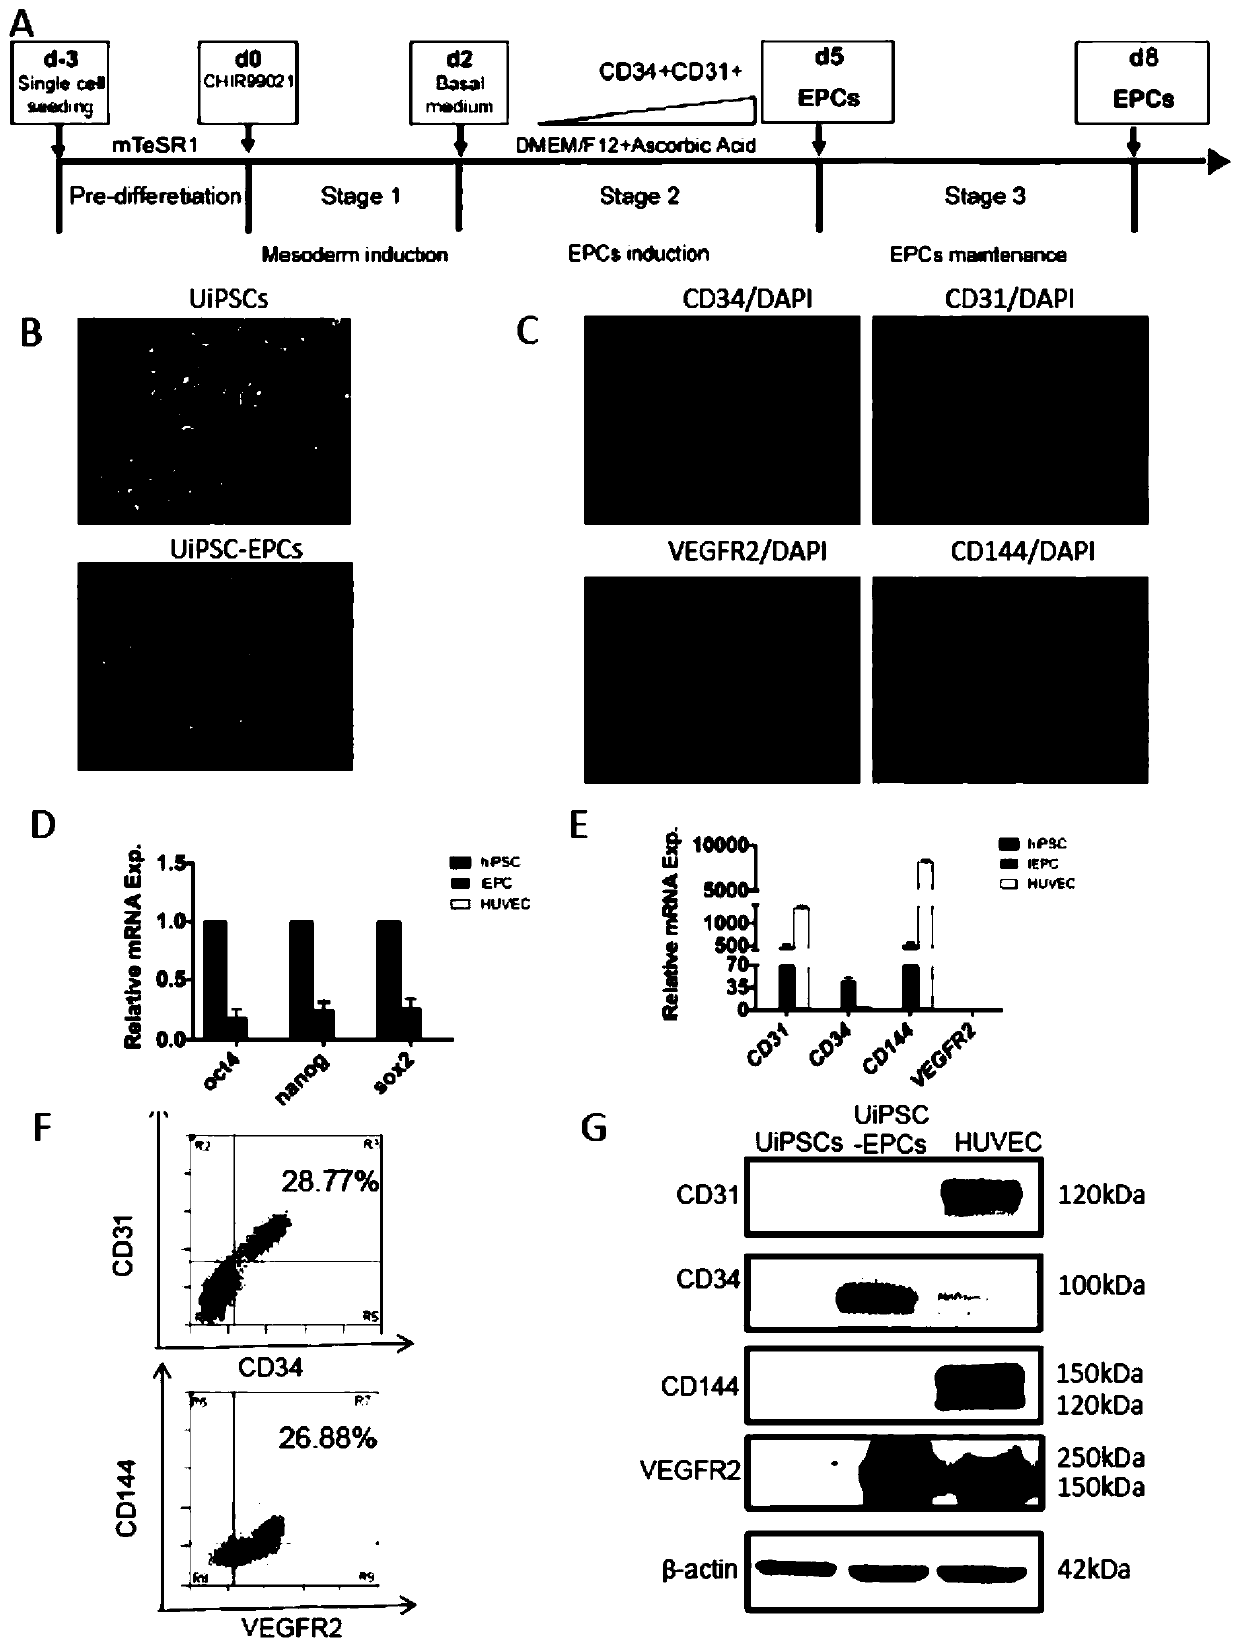 Method for inducing differentiation of human induced pluripotent stem cells into endothelial progenitor cells